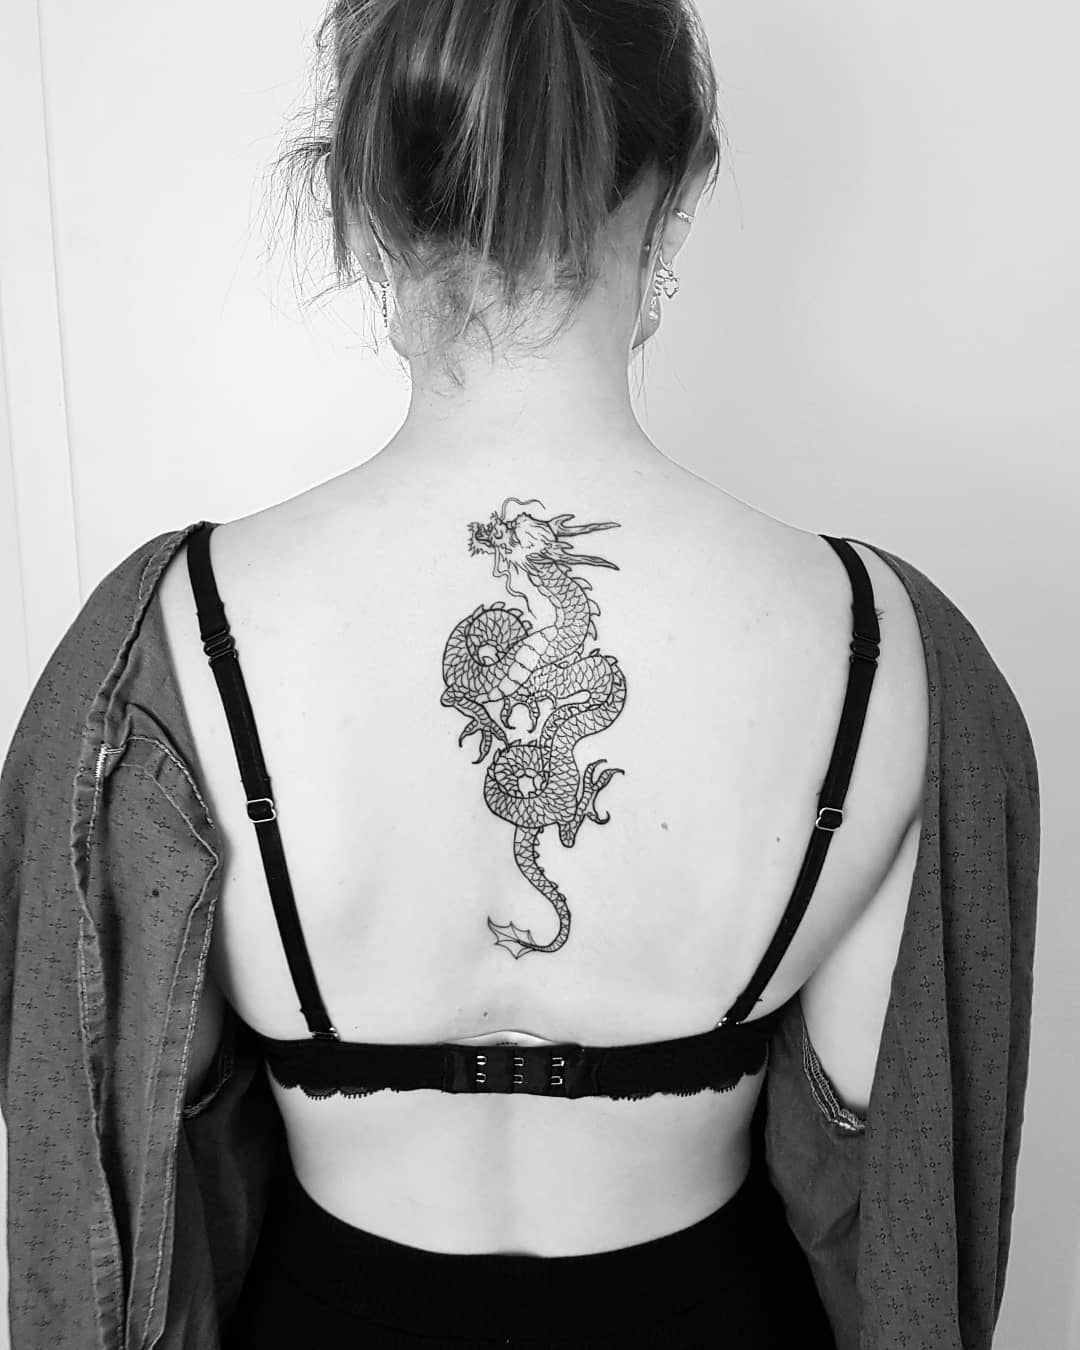 Line dragon on @julia_tms. Thanks for being so chill! -
#tattoo #irezumi #tattoo